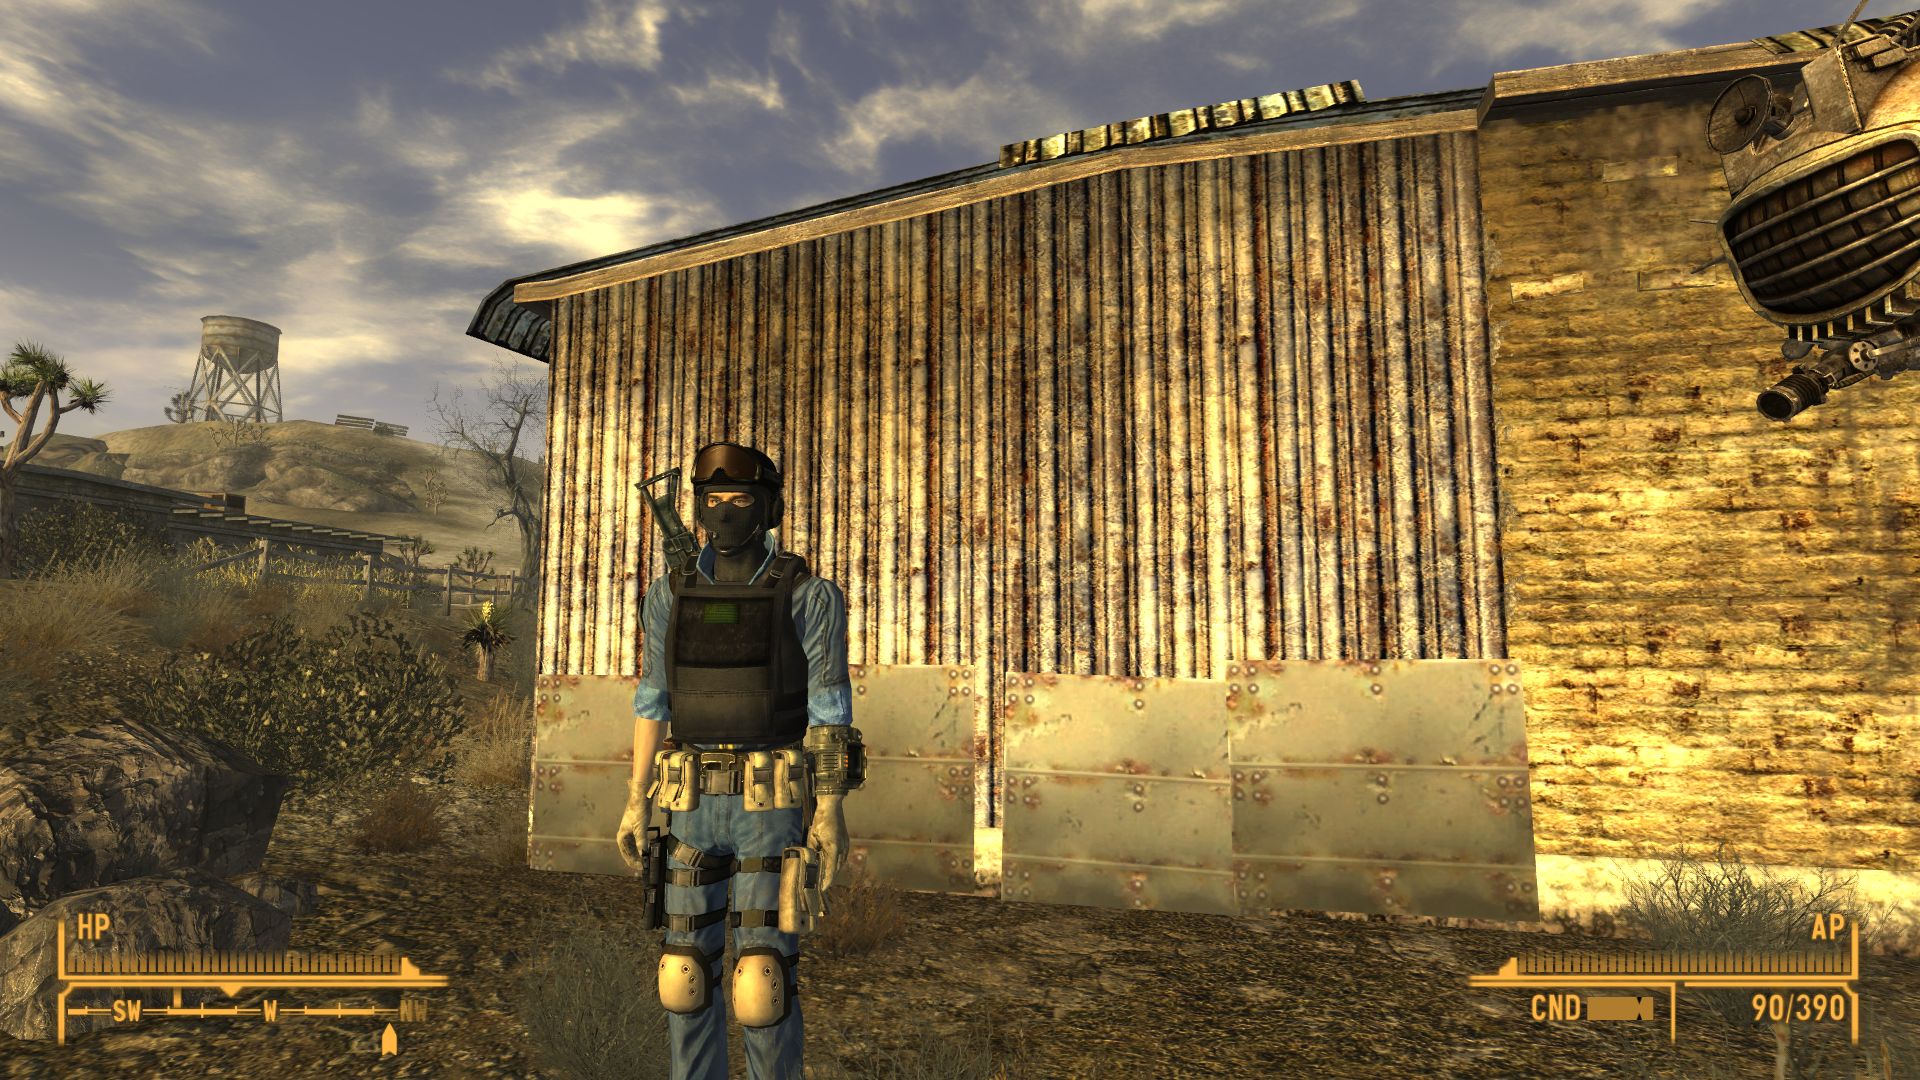 Dust fallout new. Фоллаут Нью Вегас. Кевларовый жилет Fallout New Vegas. Фоллаут Нью Вегас НКР. Colossus Armor Fallout New Vegas.